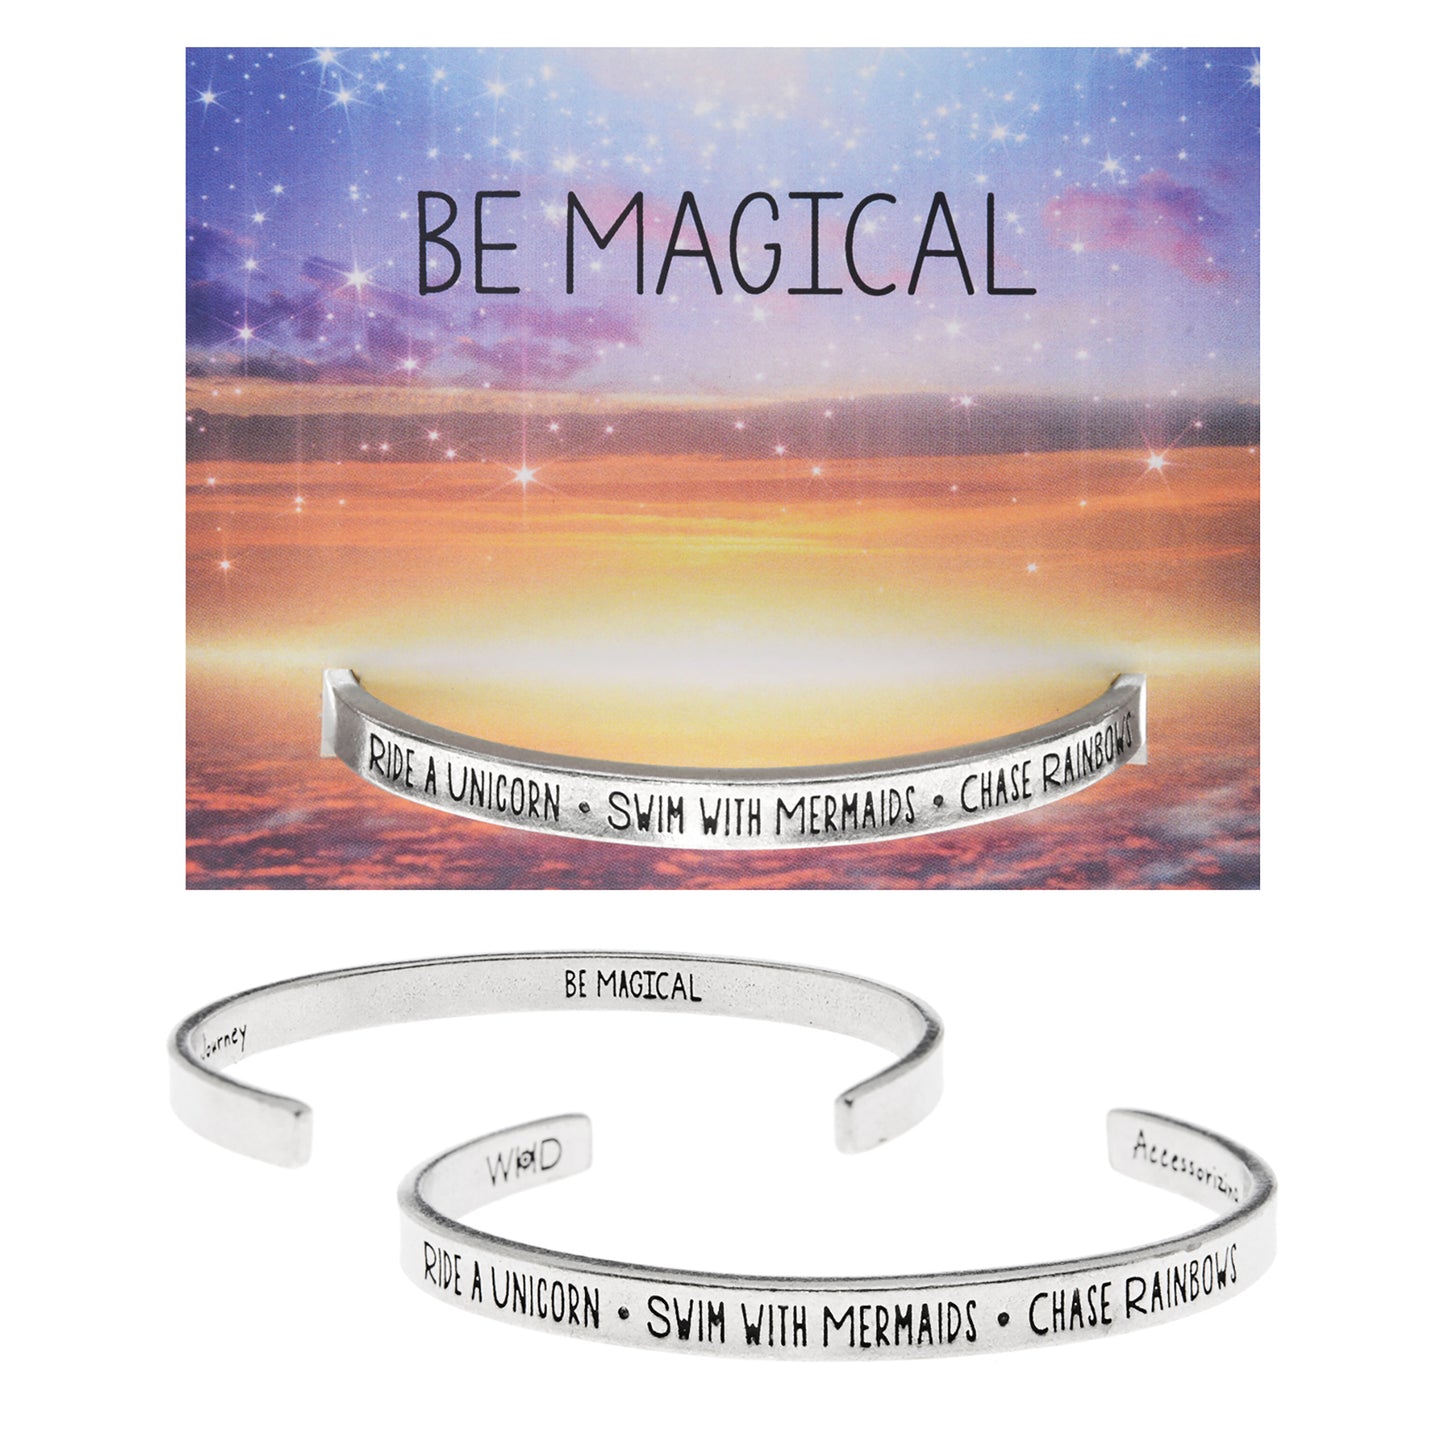 Be Magical (Ride a unicorn, swim with mermaids, chase rainbows) Bracelet on Backer Card